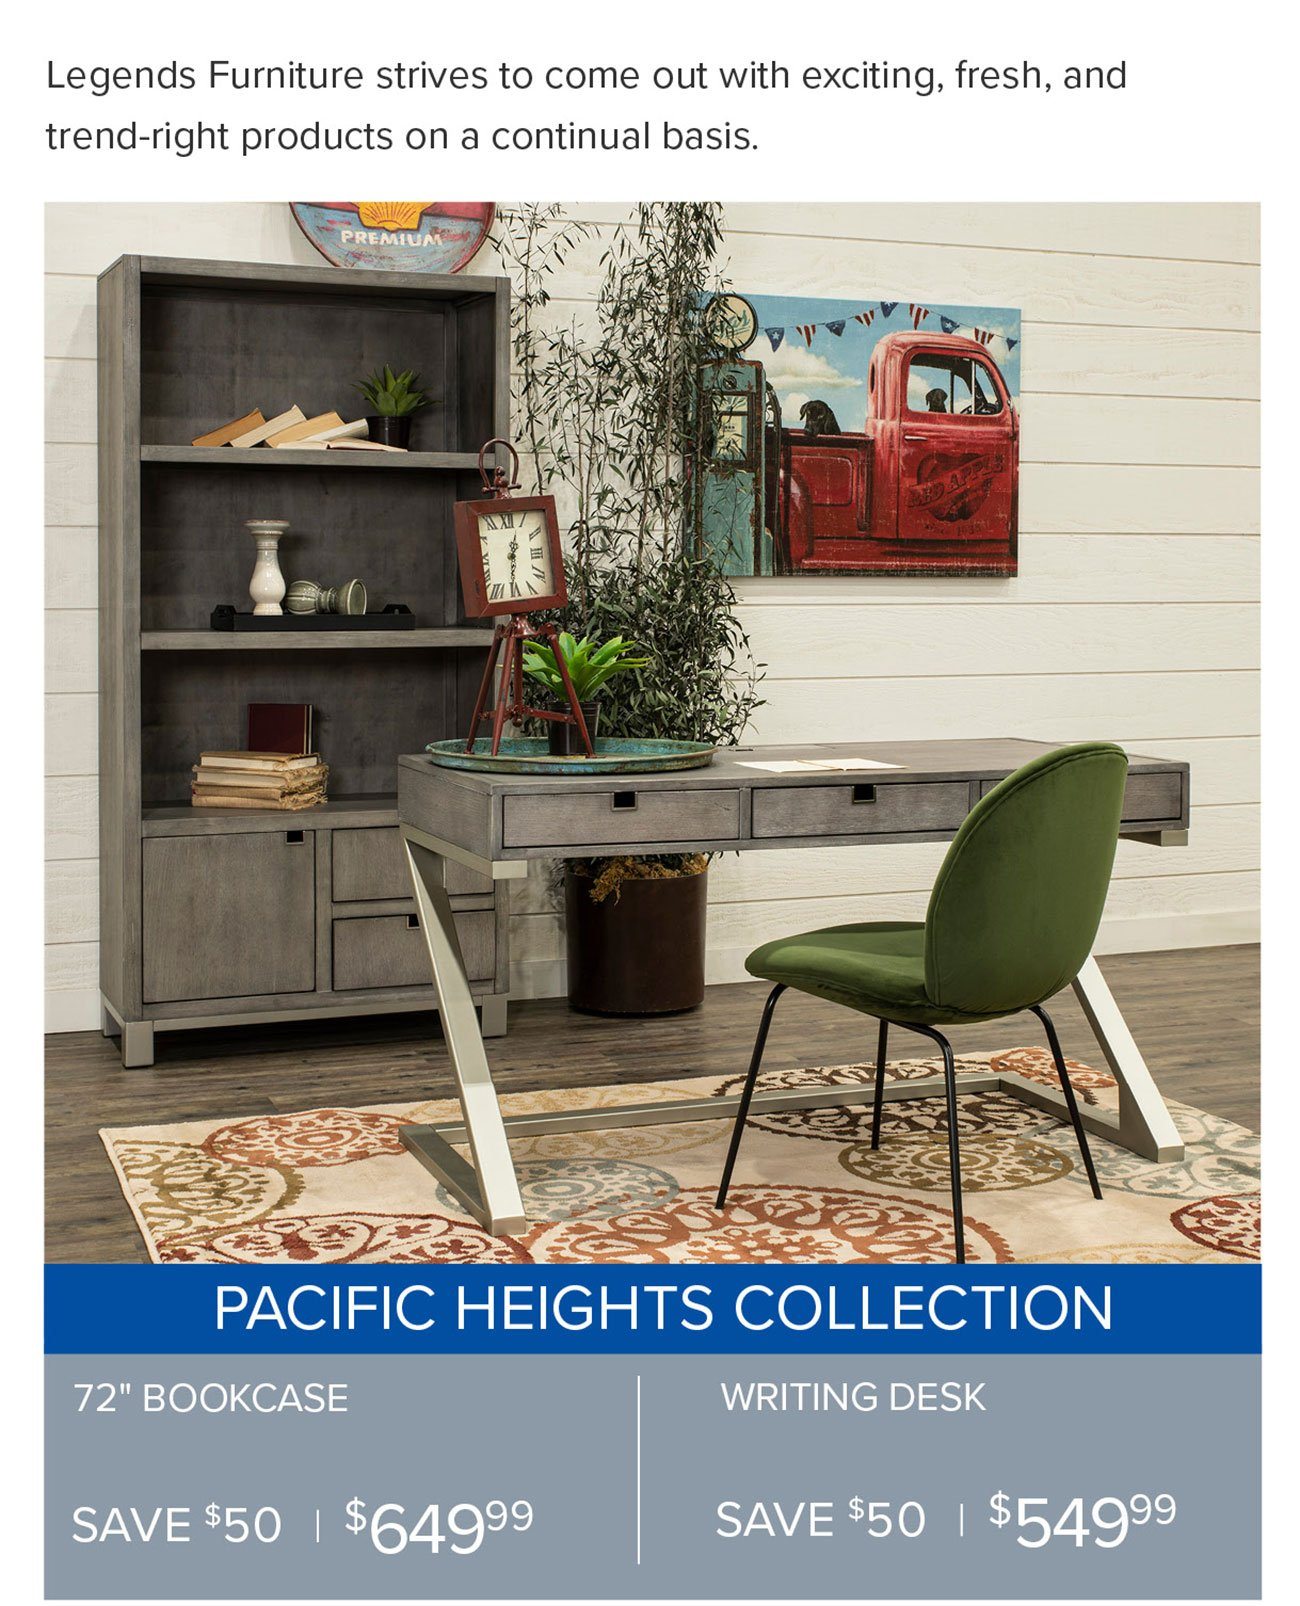 Pacific-heights-collection